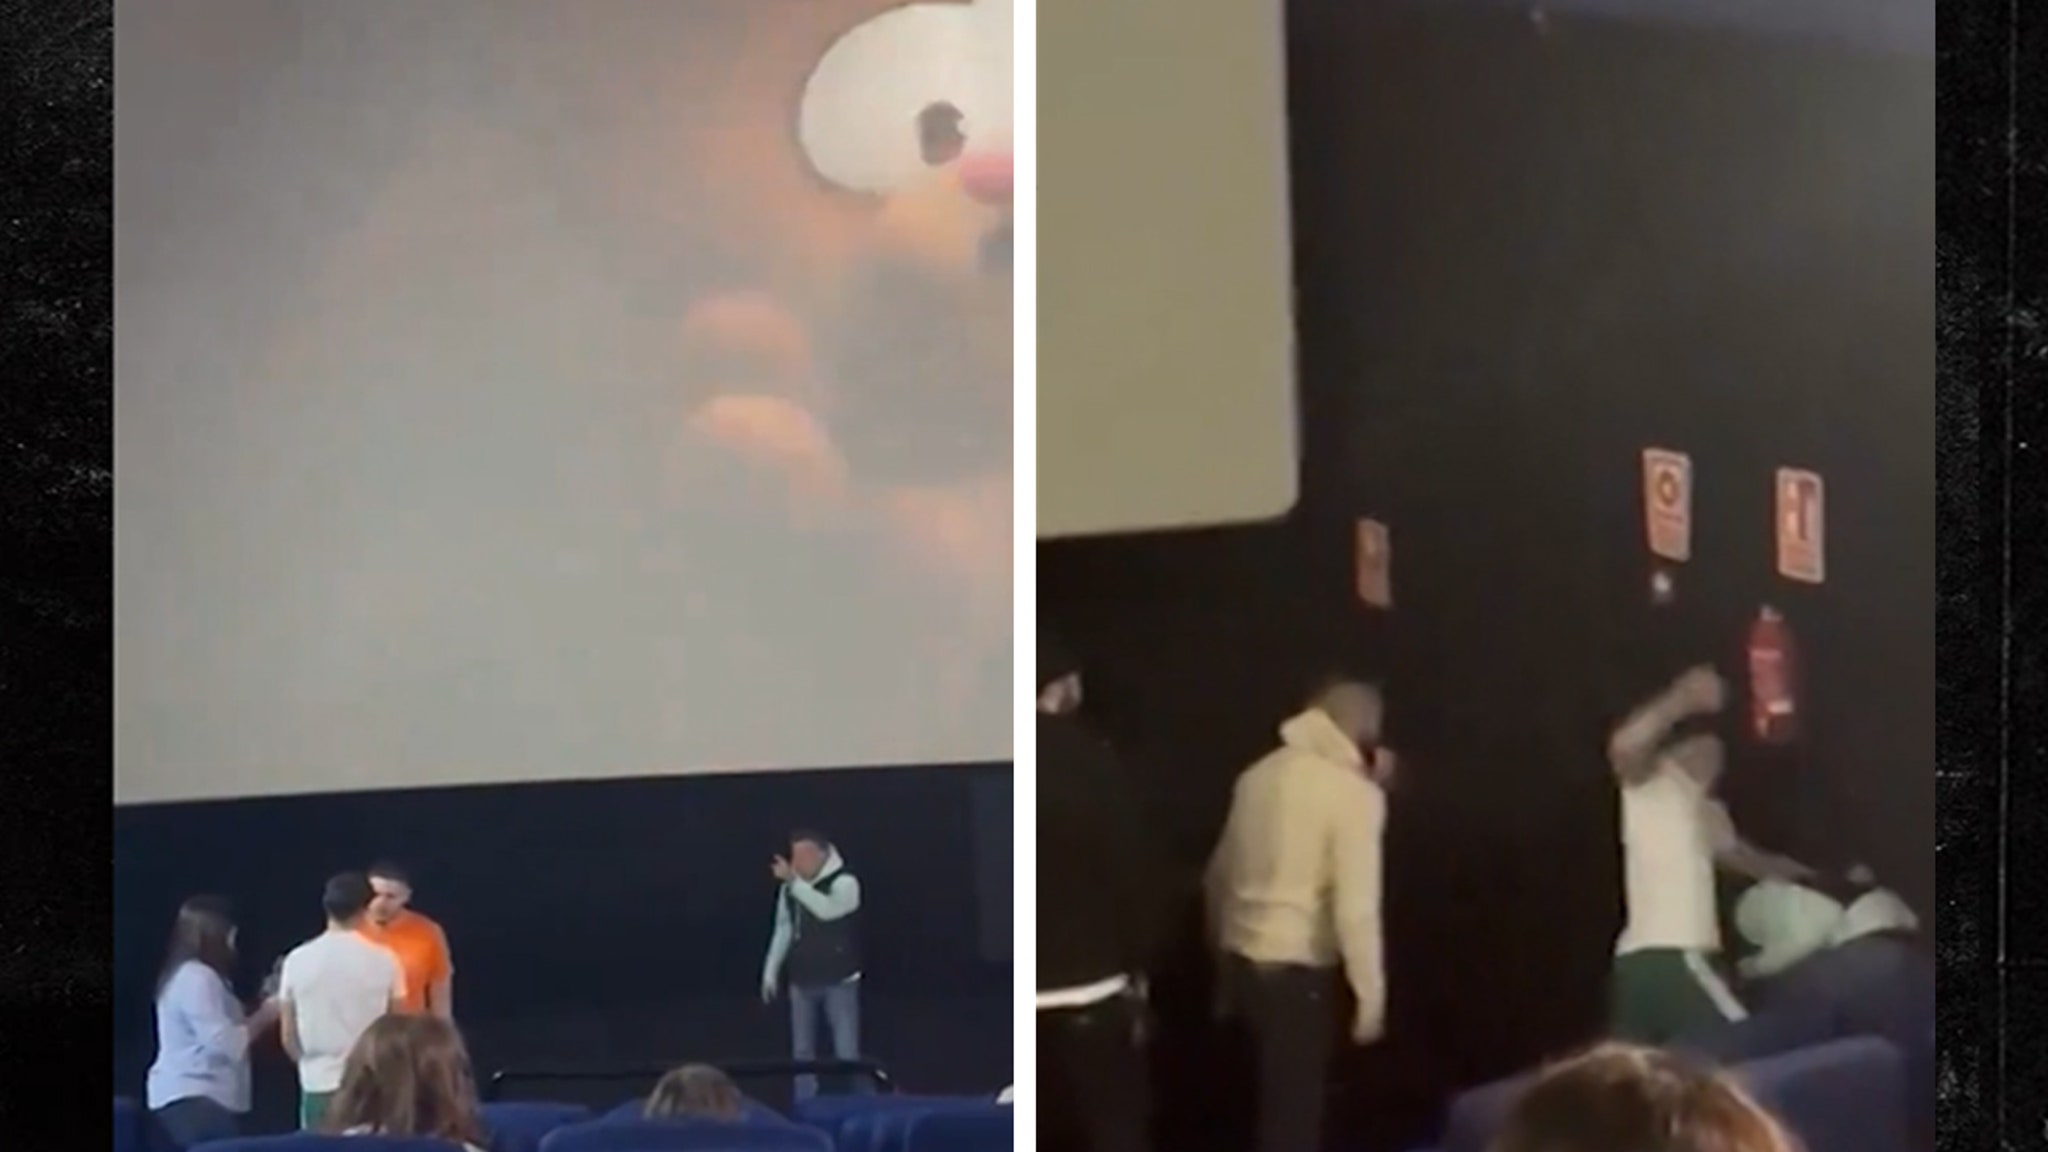 Professional Boxer Beats Up Moviegoer During ‘Garfield,’ Wild Video Shows